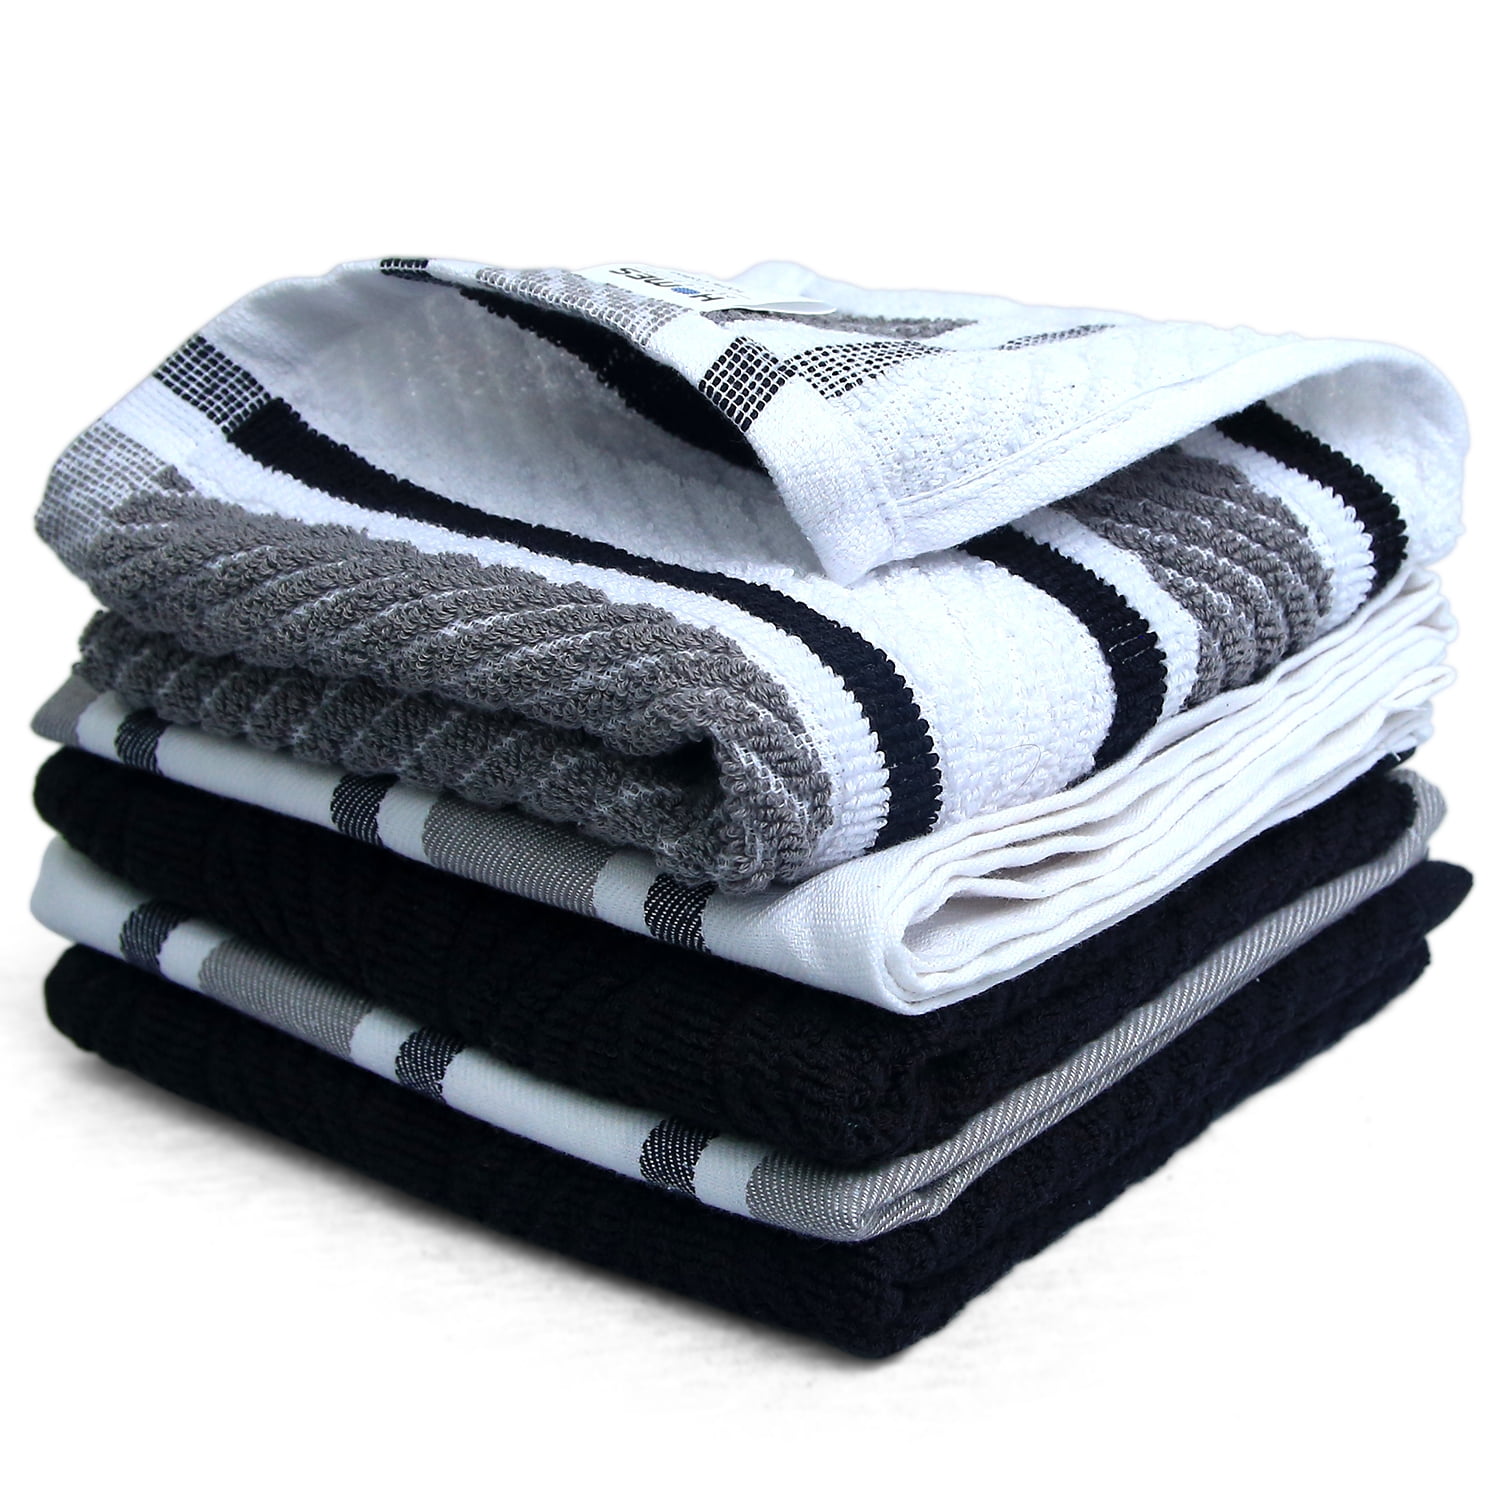 Our Table™ Select Multi Purpose Kitchen Towels in Black, Set Of 4 - Harris  Teeter